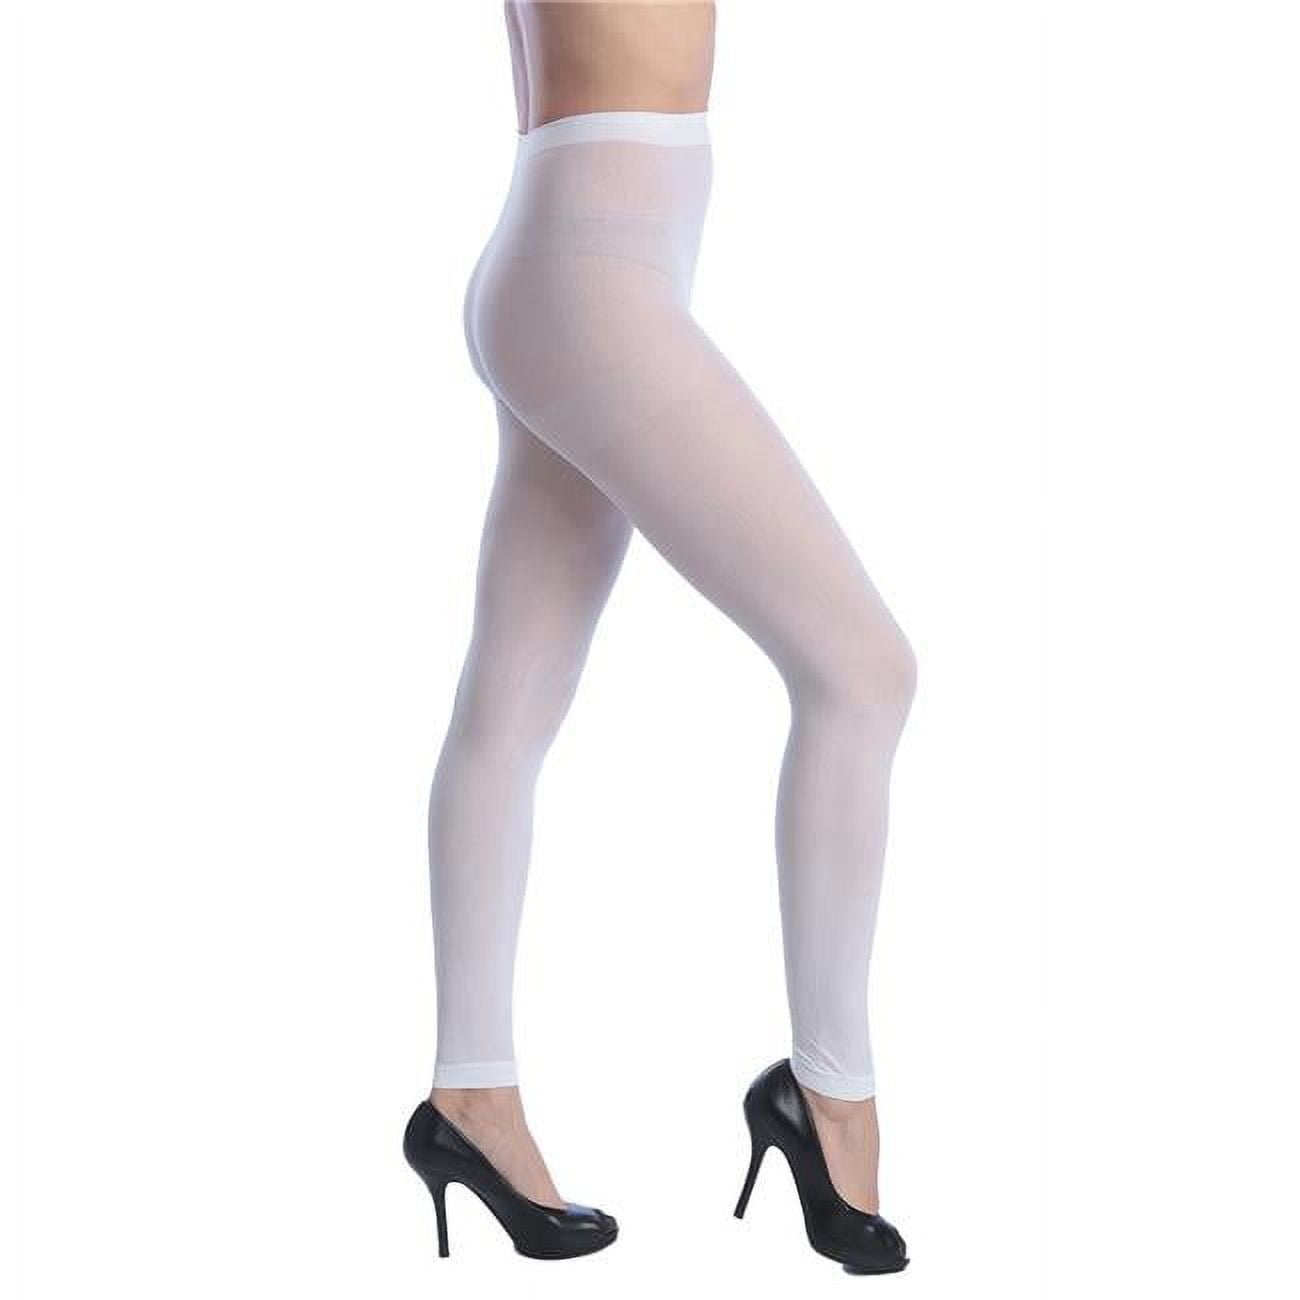 Women Opaque Control Top Footless Tights, White - One Size - Case of 120